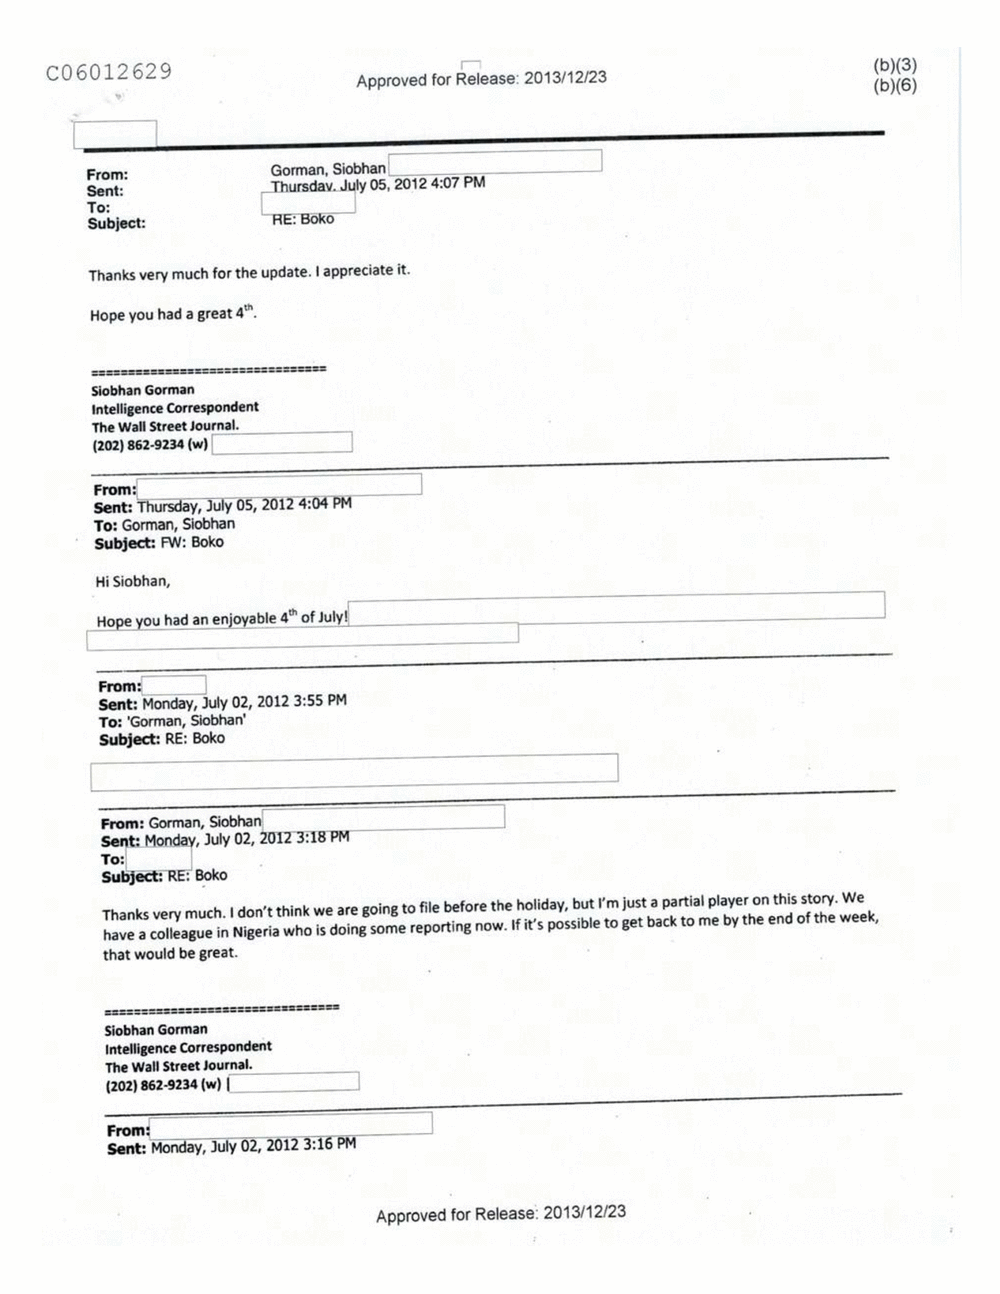 Page 186 from Email Correspondence Between Reporters and CIA Flacks